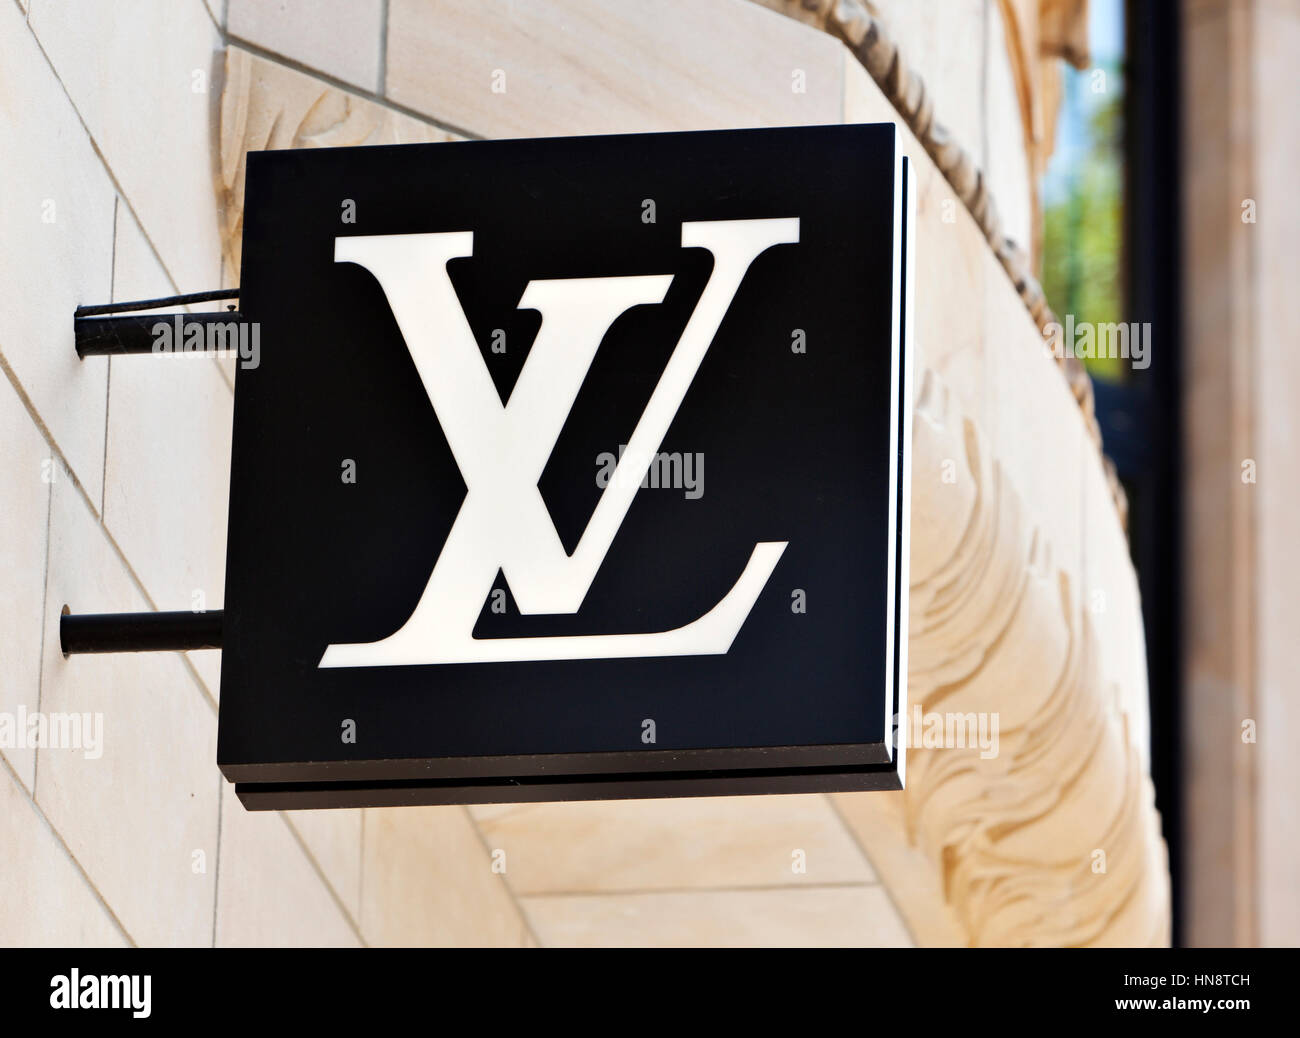 Dusseldorf, Germany - August 20, 2011: Louis Vuitton logo at the store on Königsallee. Louis Vuitton Malletier is a french fashion house and well-know Stock Photo